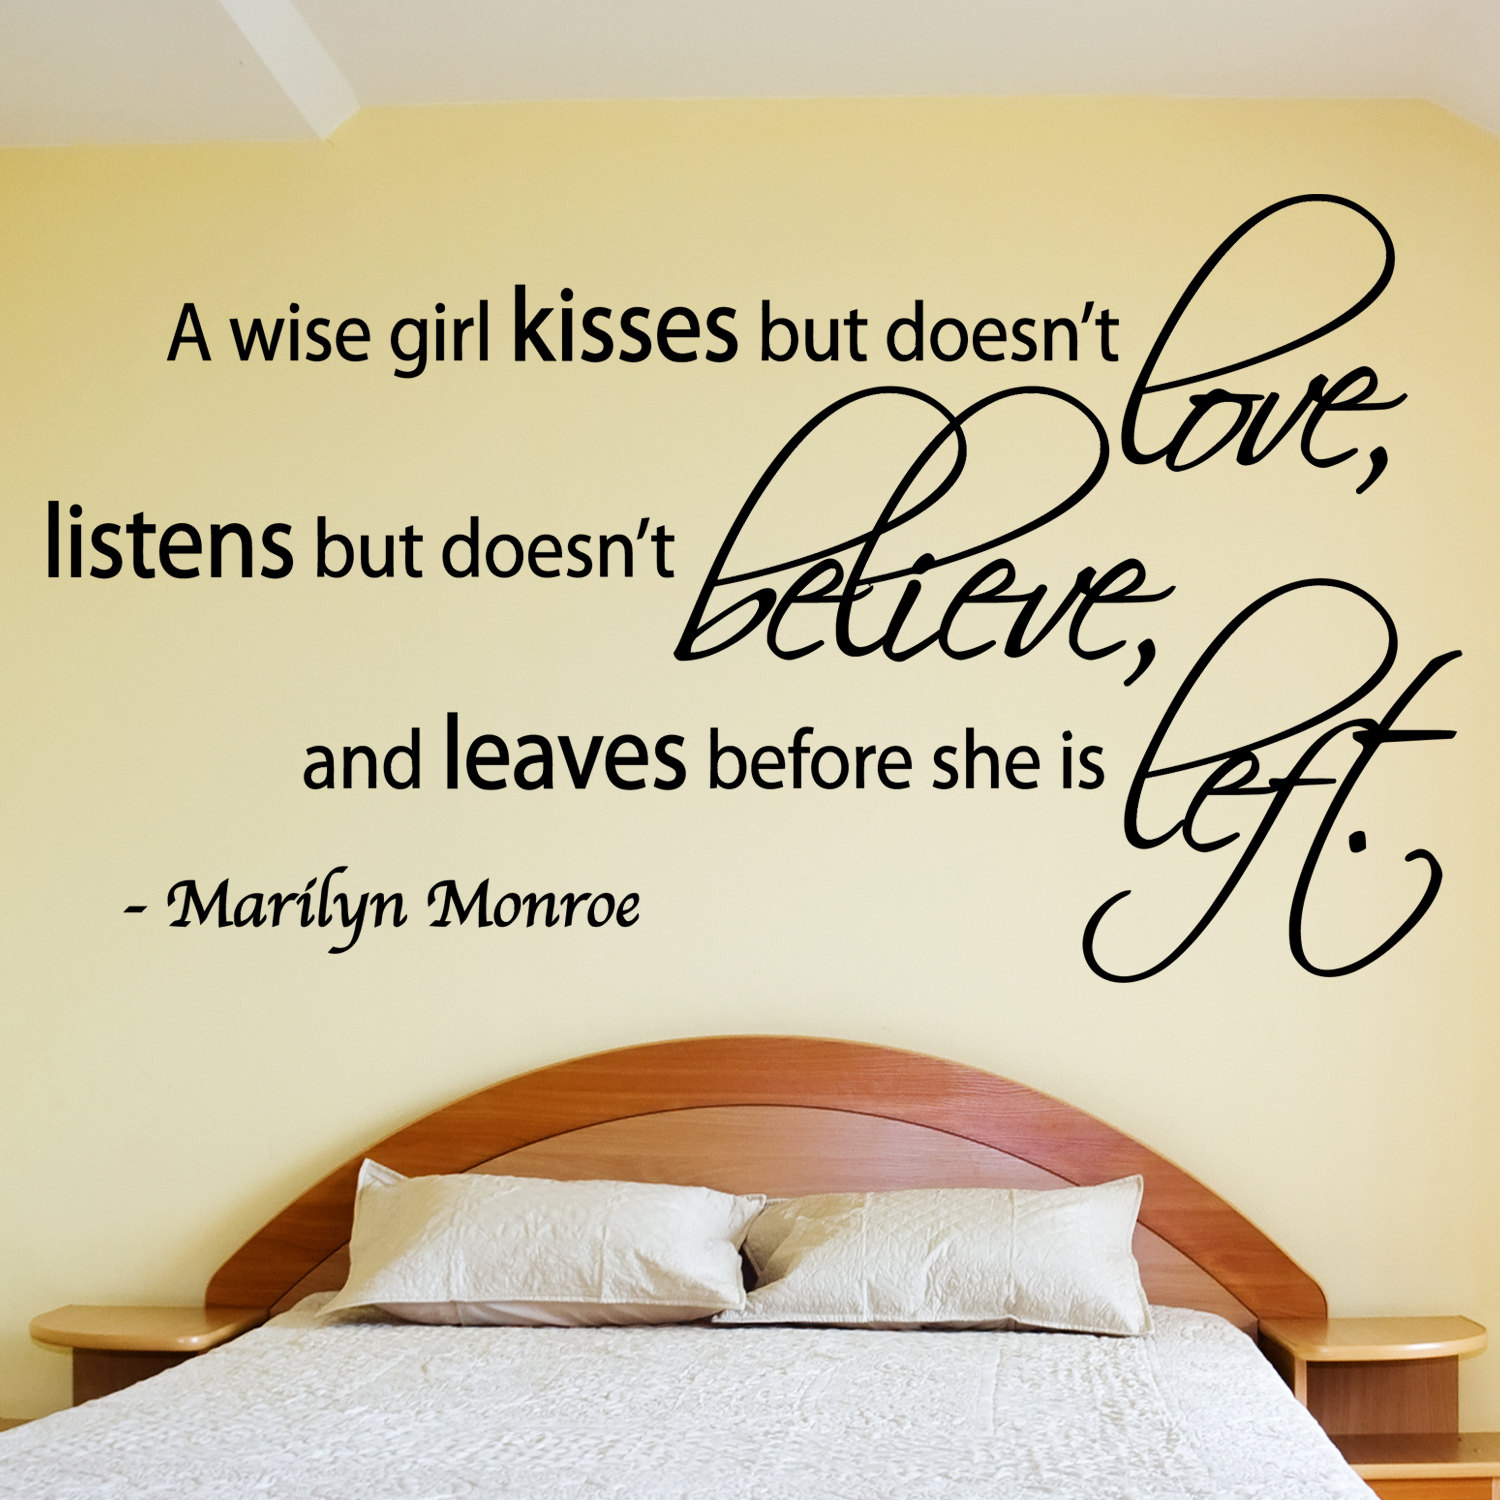 A wise girl kisses but doesn't love, listens but doesn't believe, and leaves before she is left. Marilyn Monroe